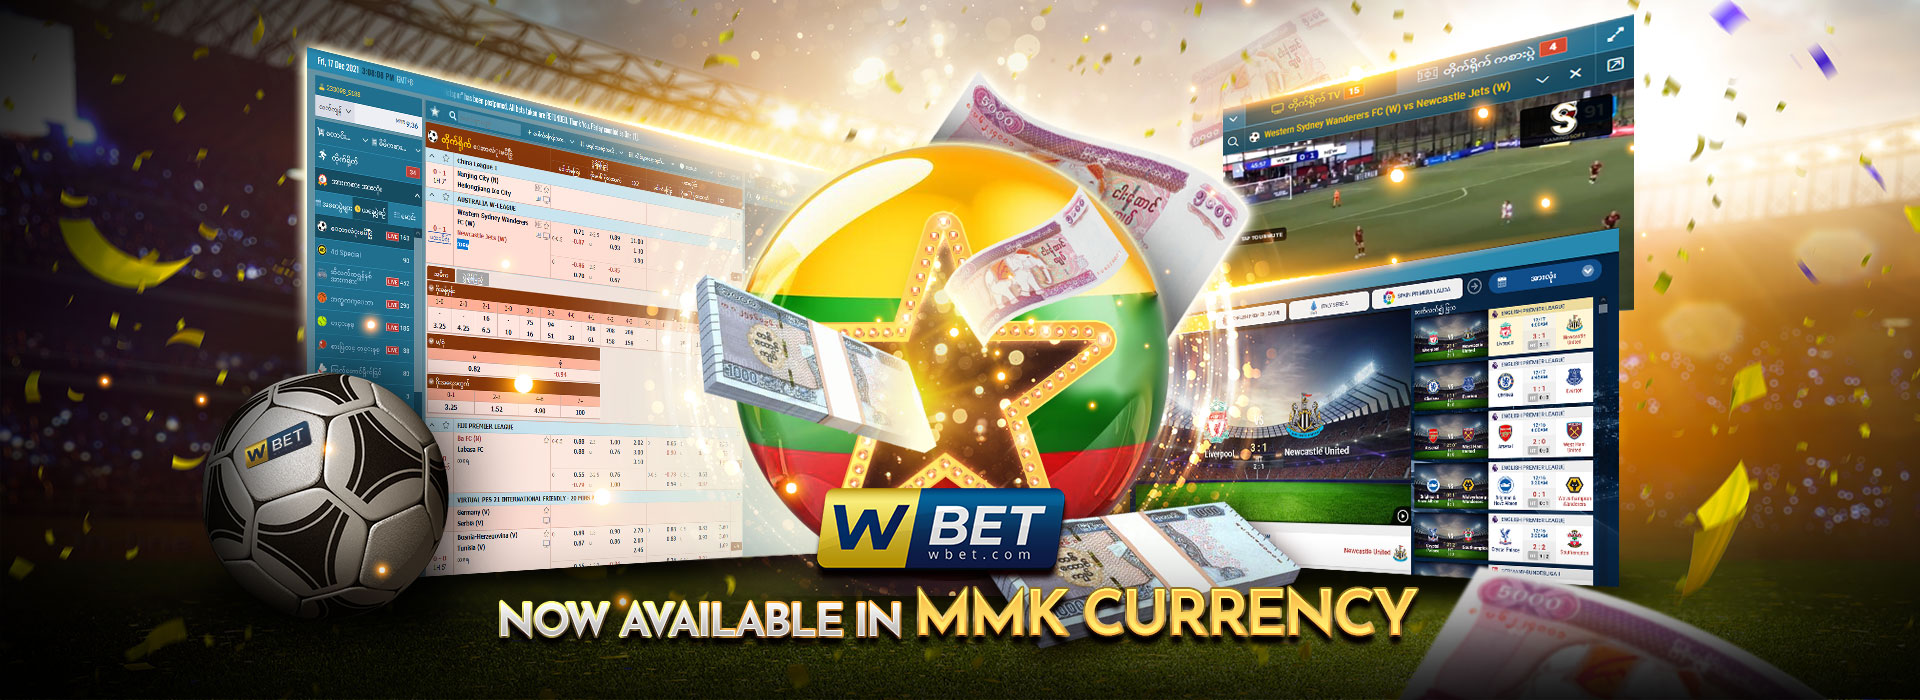 Wbet now available in MMK currency Web Banner - GamingSoft